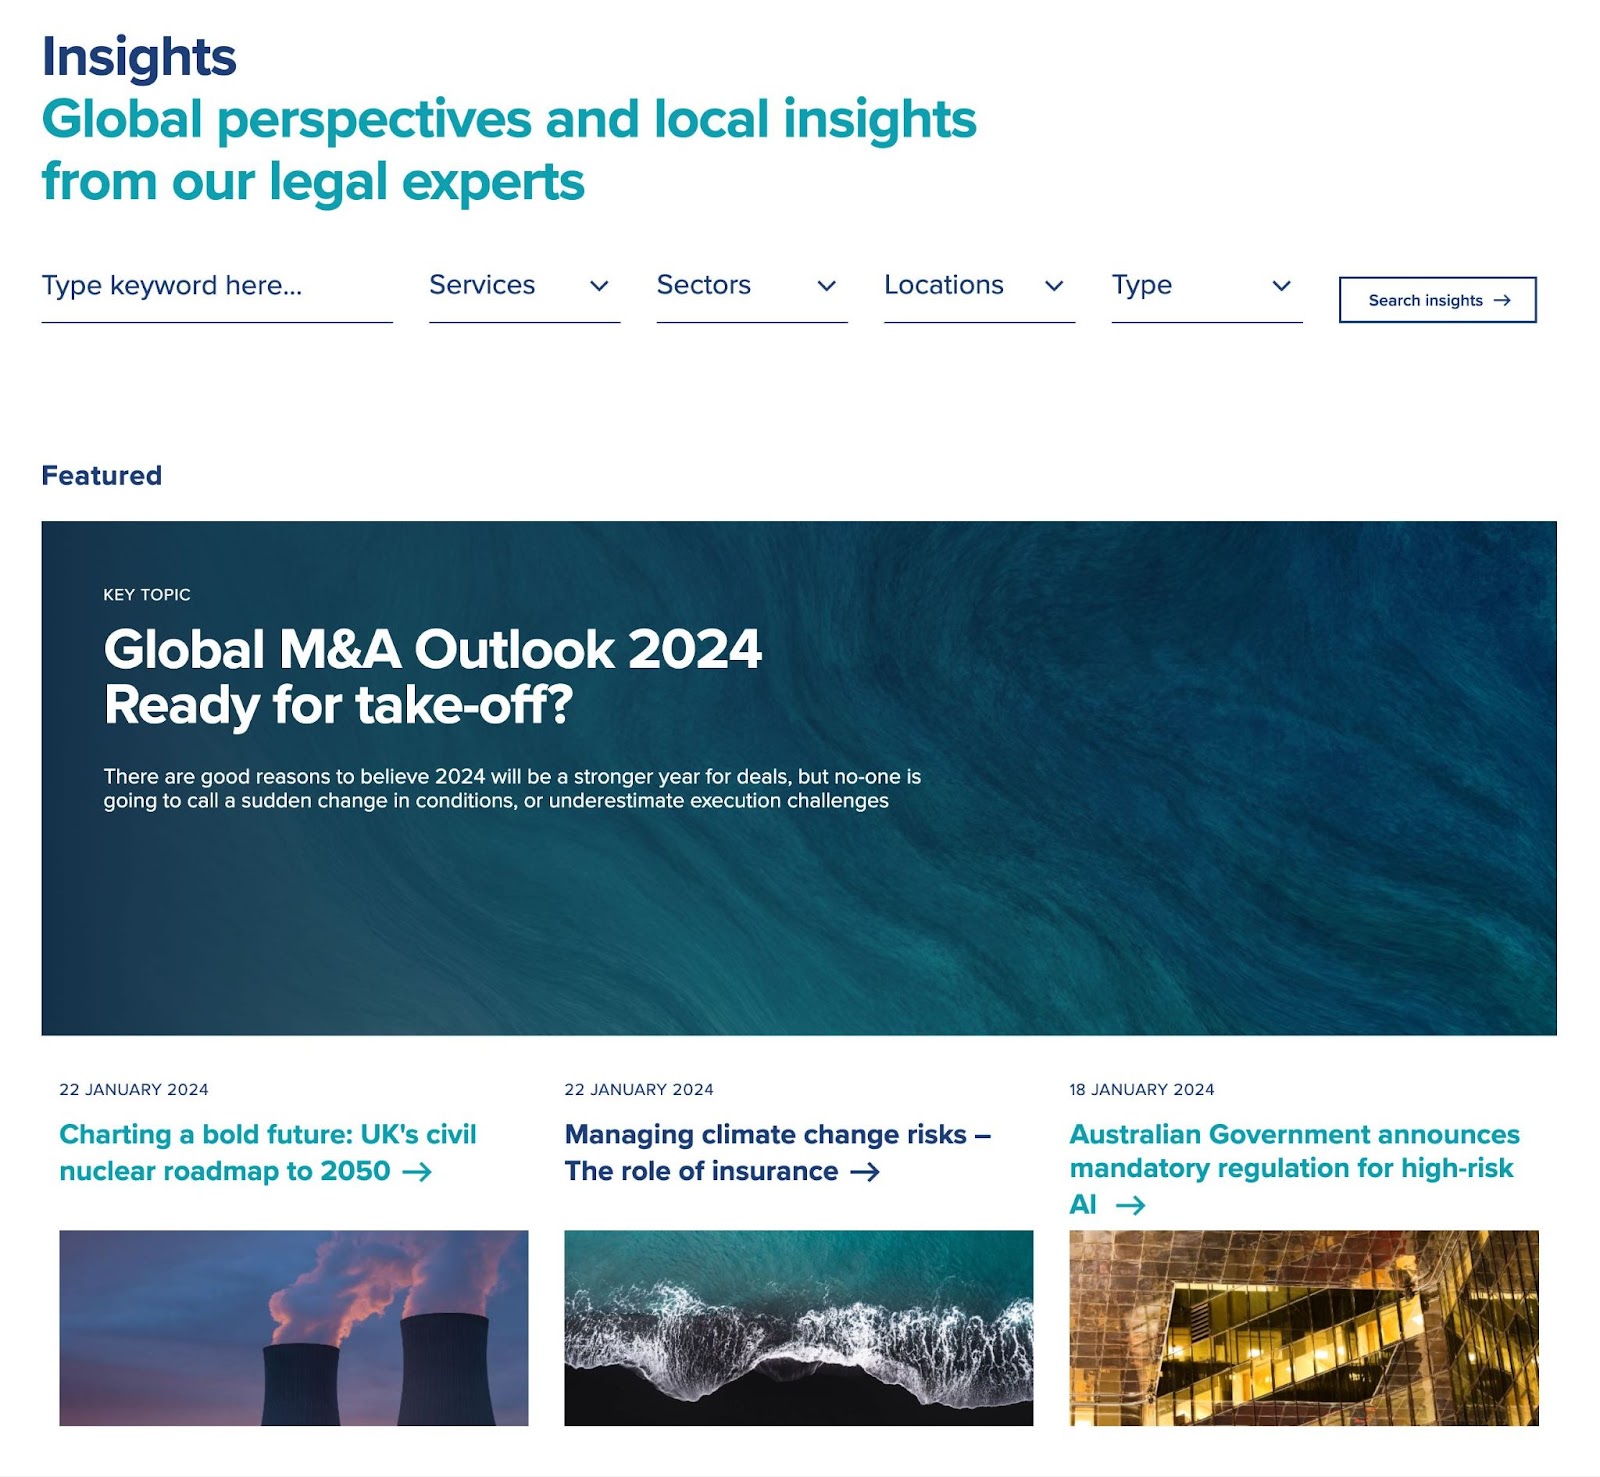 “Insights” section on the Herbert Smith Freehills' site